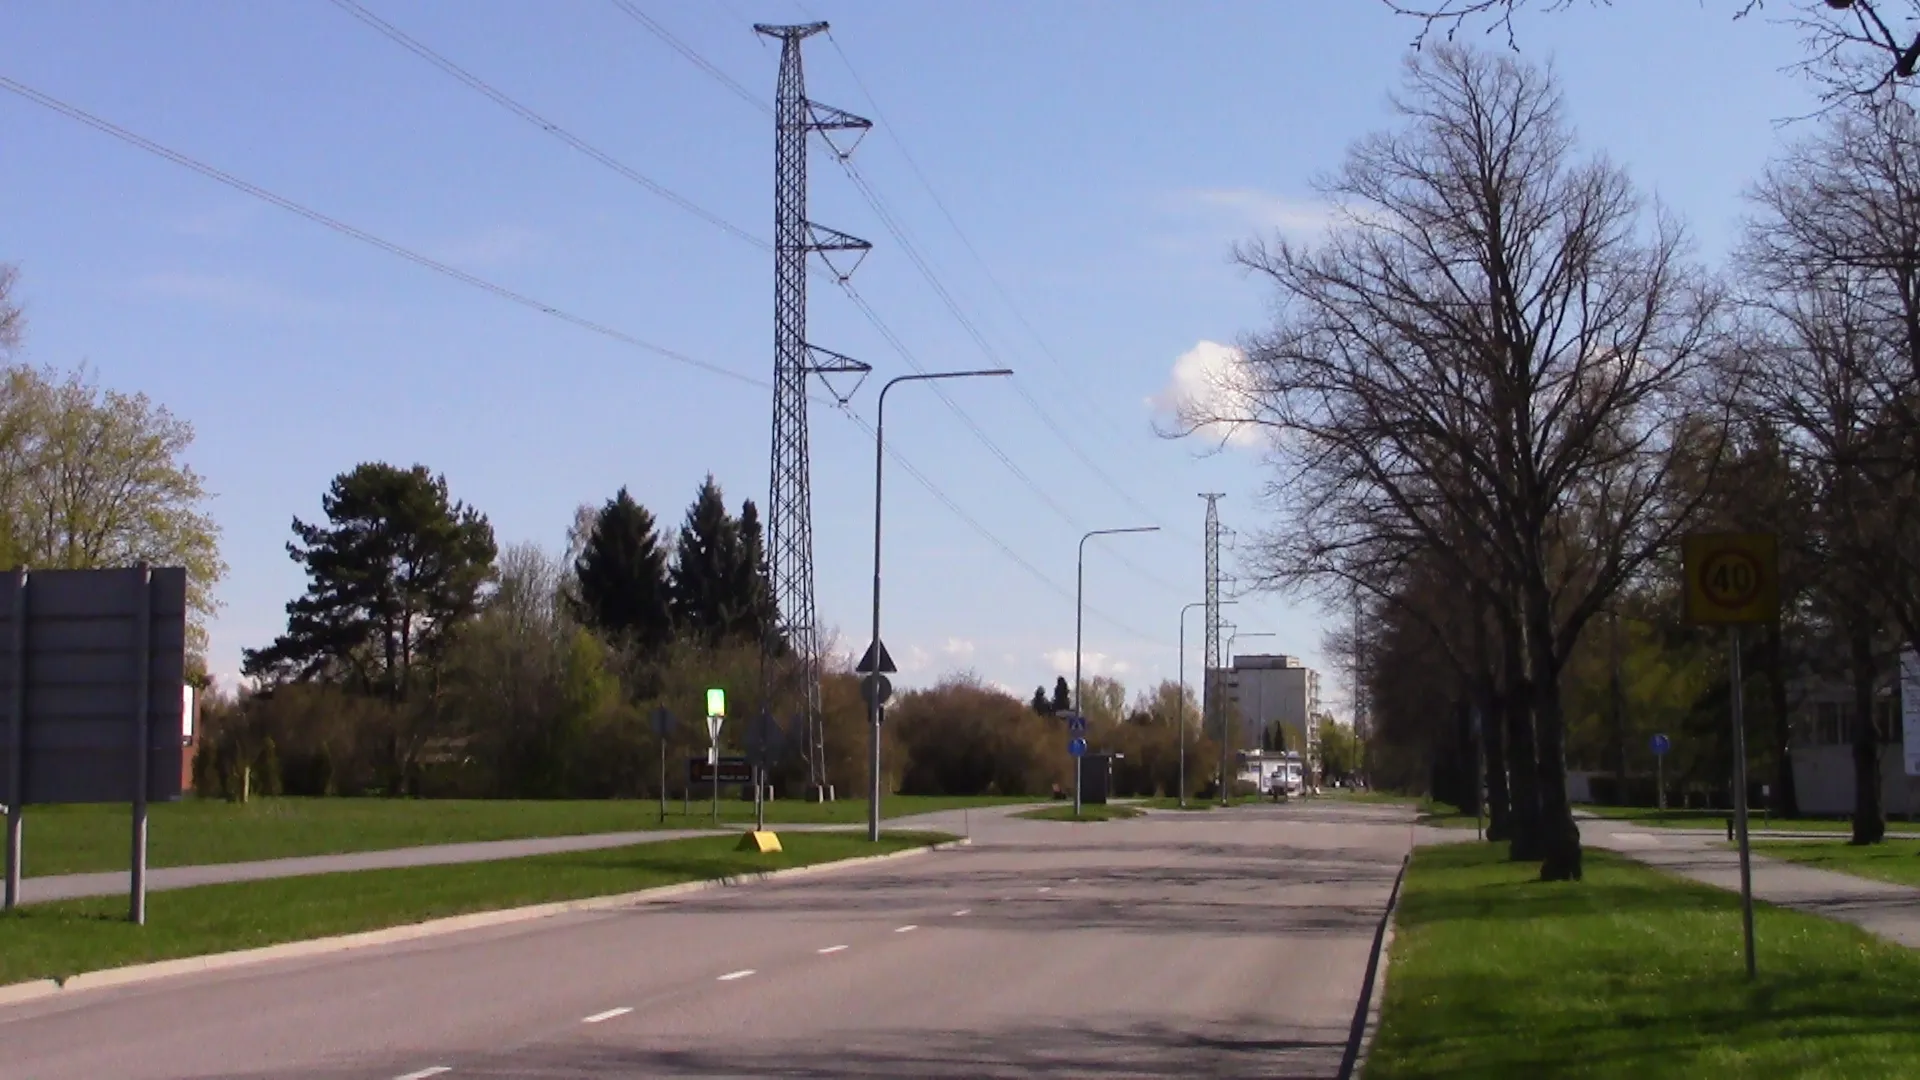 Photo showing: Koivulantie road at Herralahti district in Pori, Finland. The picture's taken near the crossing of Puinnintie road.